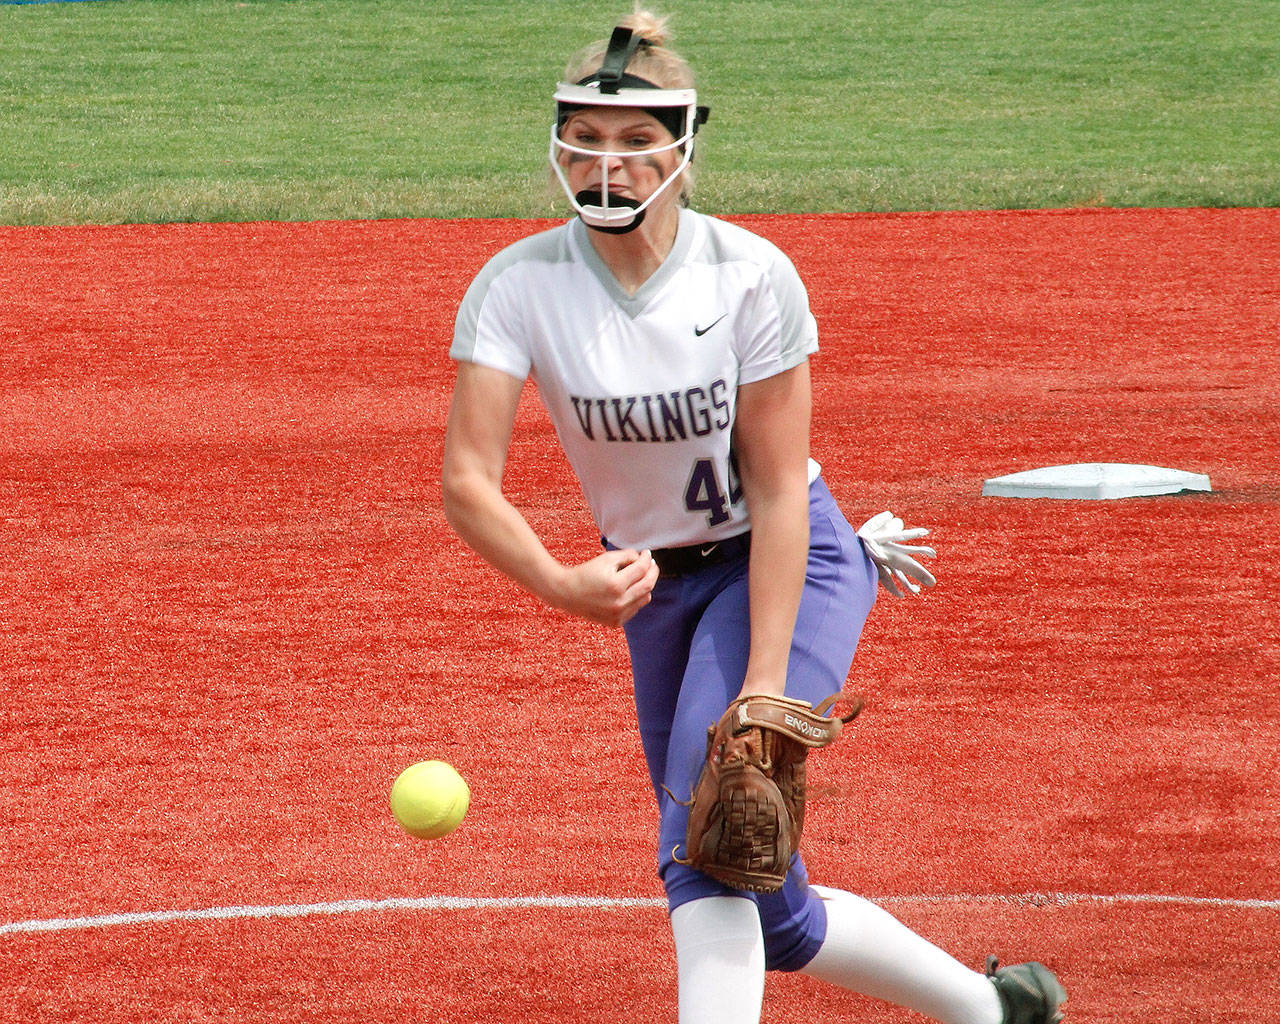 North Kitsap sophomore Makalya Stockman had a breakout year as a freshman and would have been the unquestioned ace on this year’s Vikings fastpitch team. (Mark Krulish/Kitsap News Group)